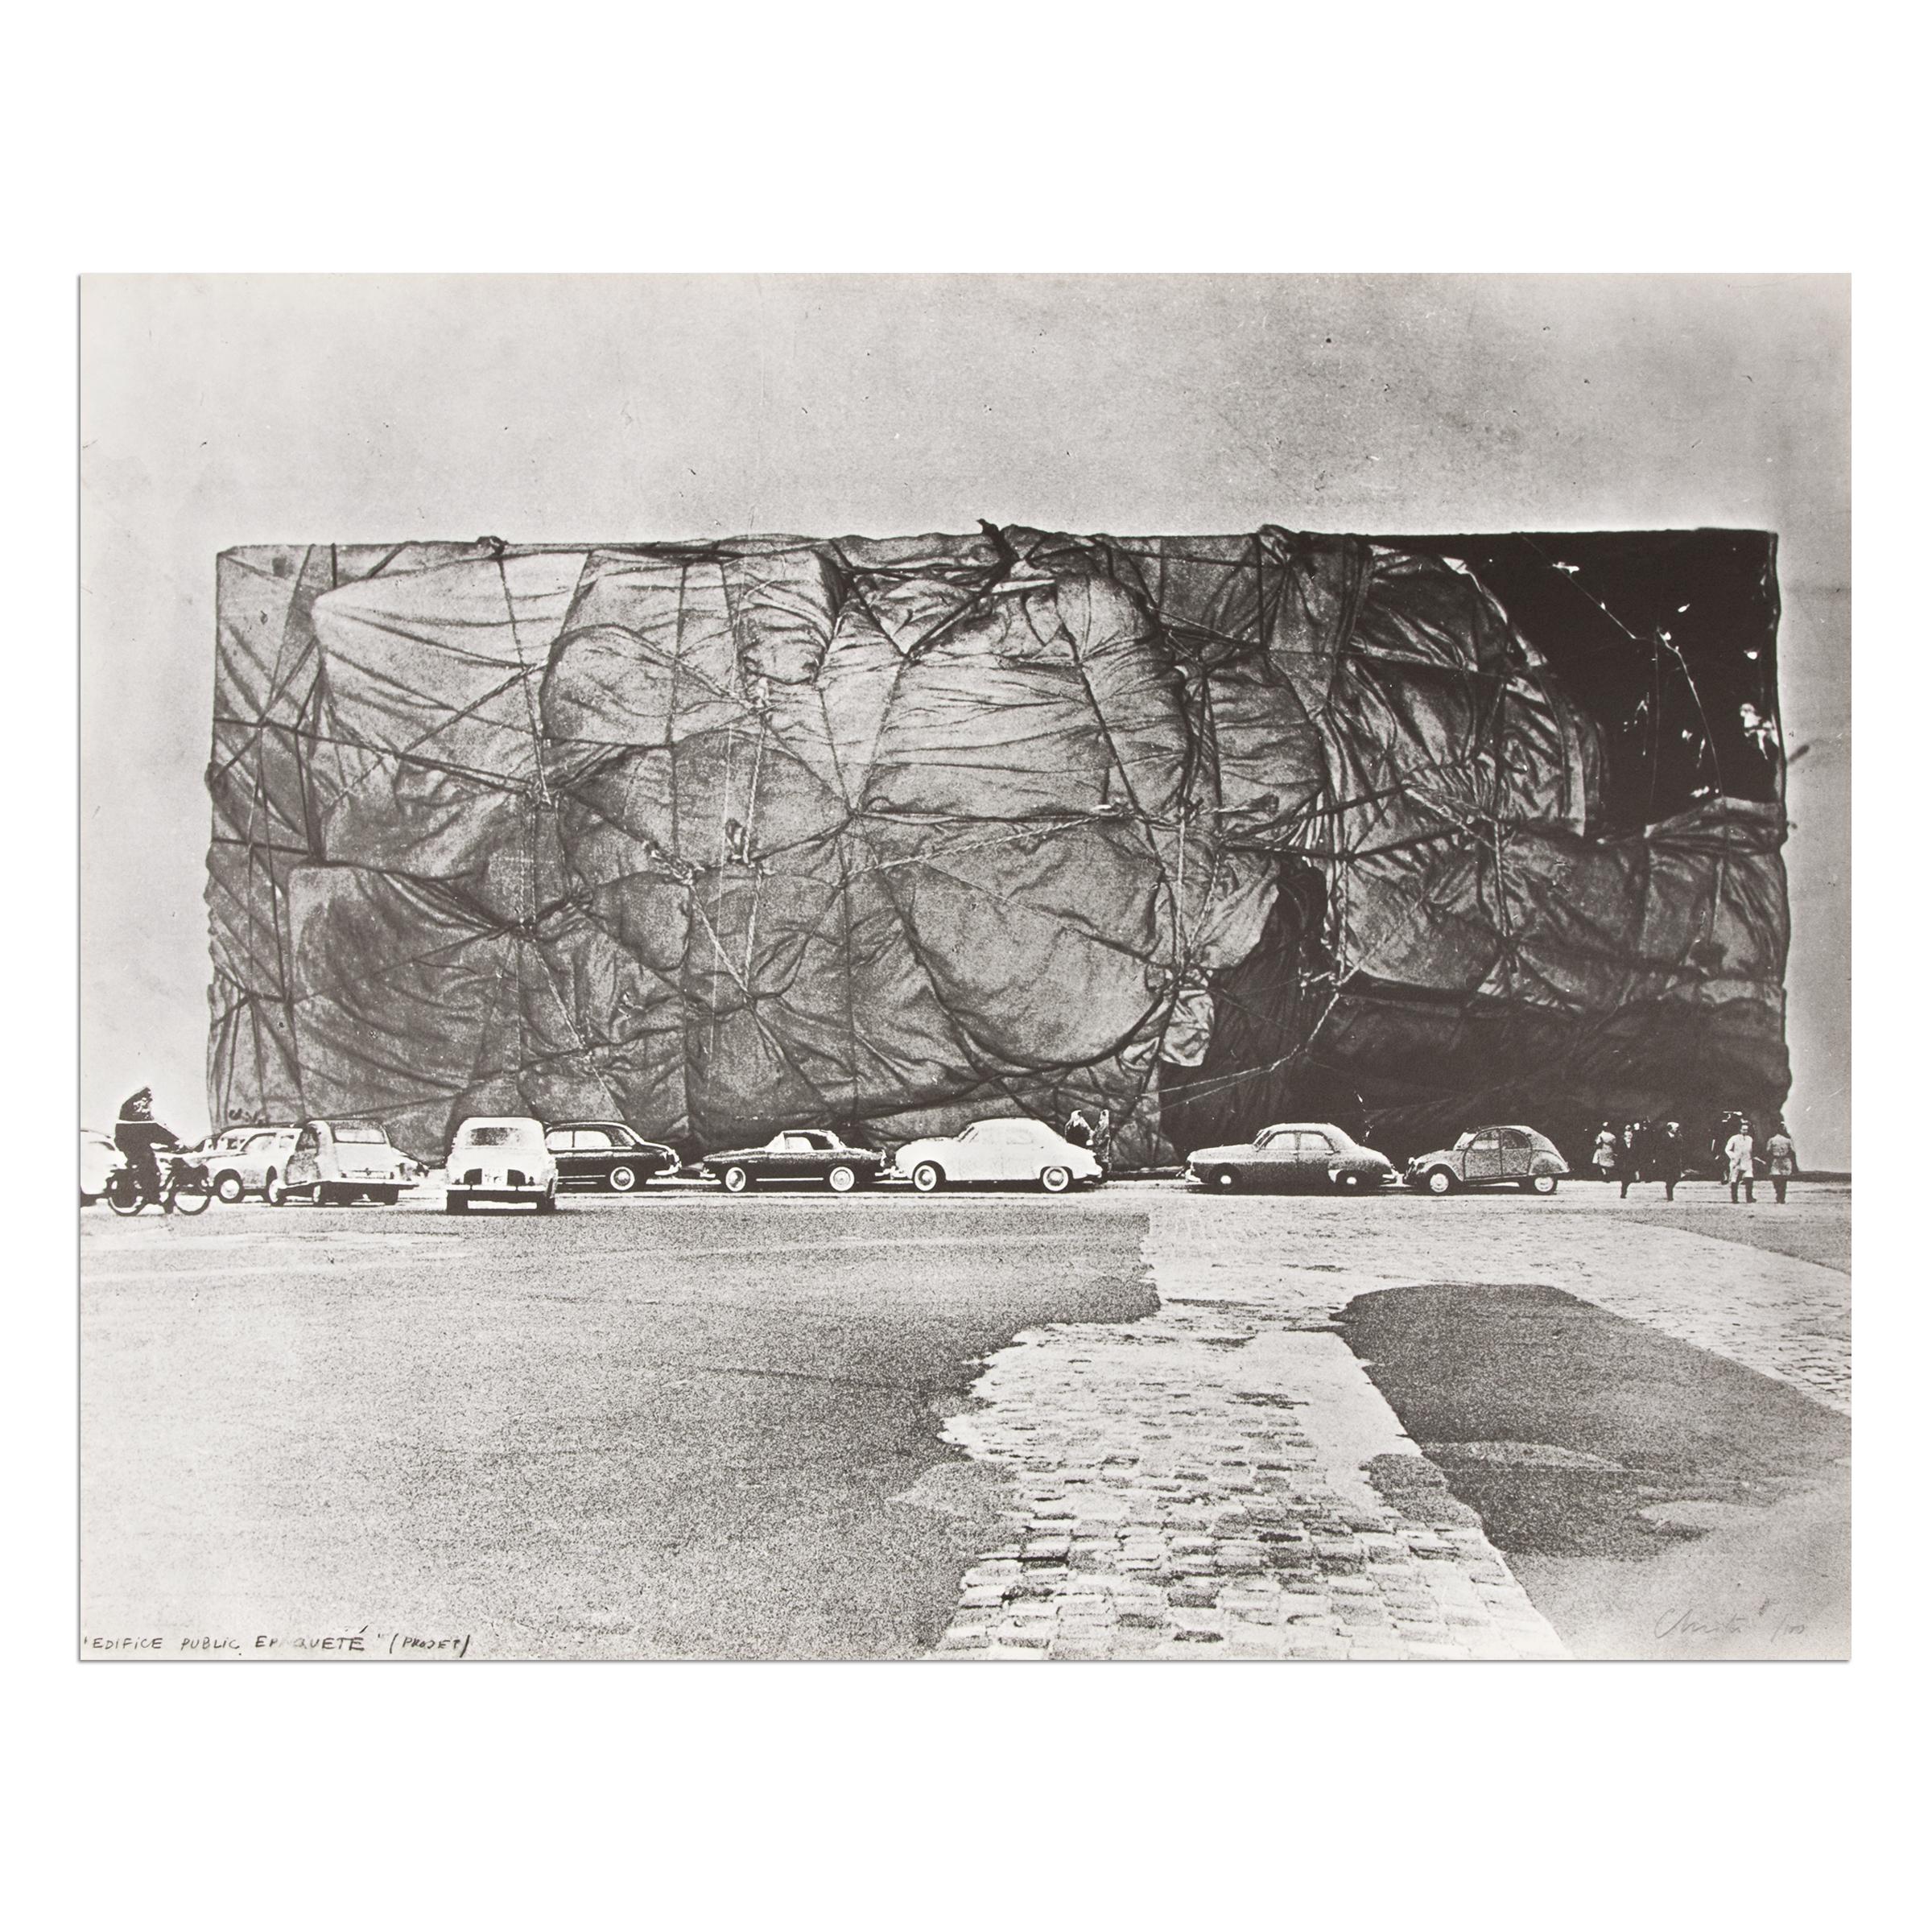 Christo (American-Bulgarian, b. 1935)
Edifice Public Epaqueté, Project (Ecole Militaire de Paris, from Monuments), 1968
Medium: Screen print on Bristol board
Dimensions: 70 × 54.5 cm (27 3/5 × 21 1/2 in)
Edition of 100: Hand-signed and numbered in